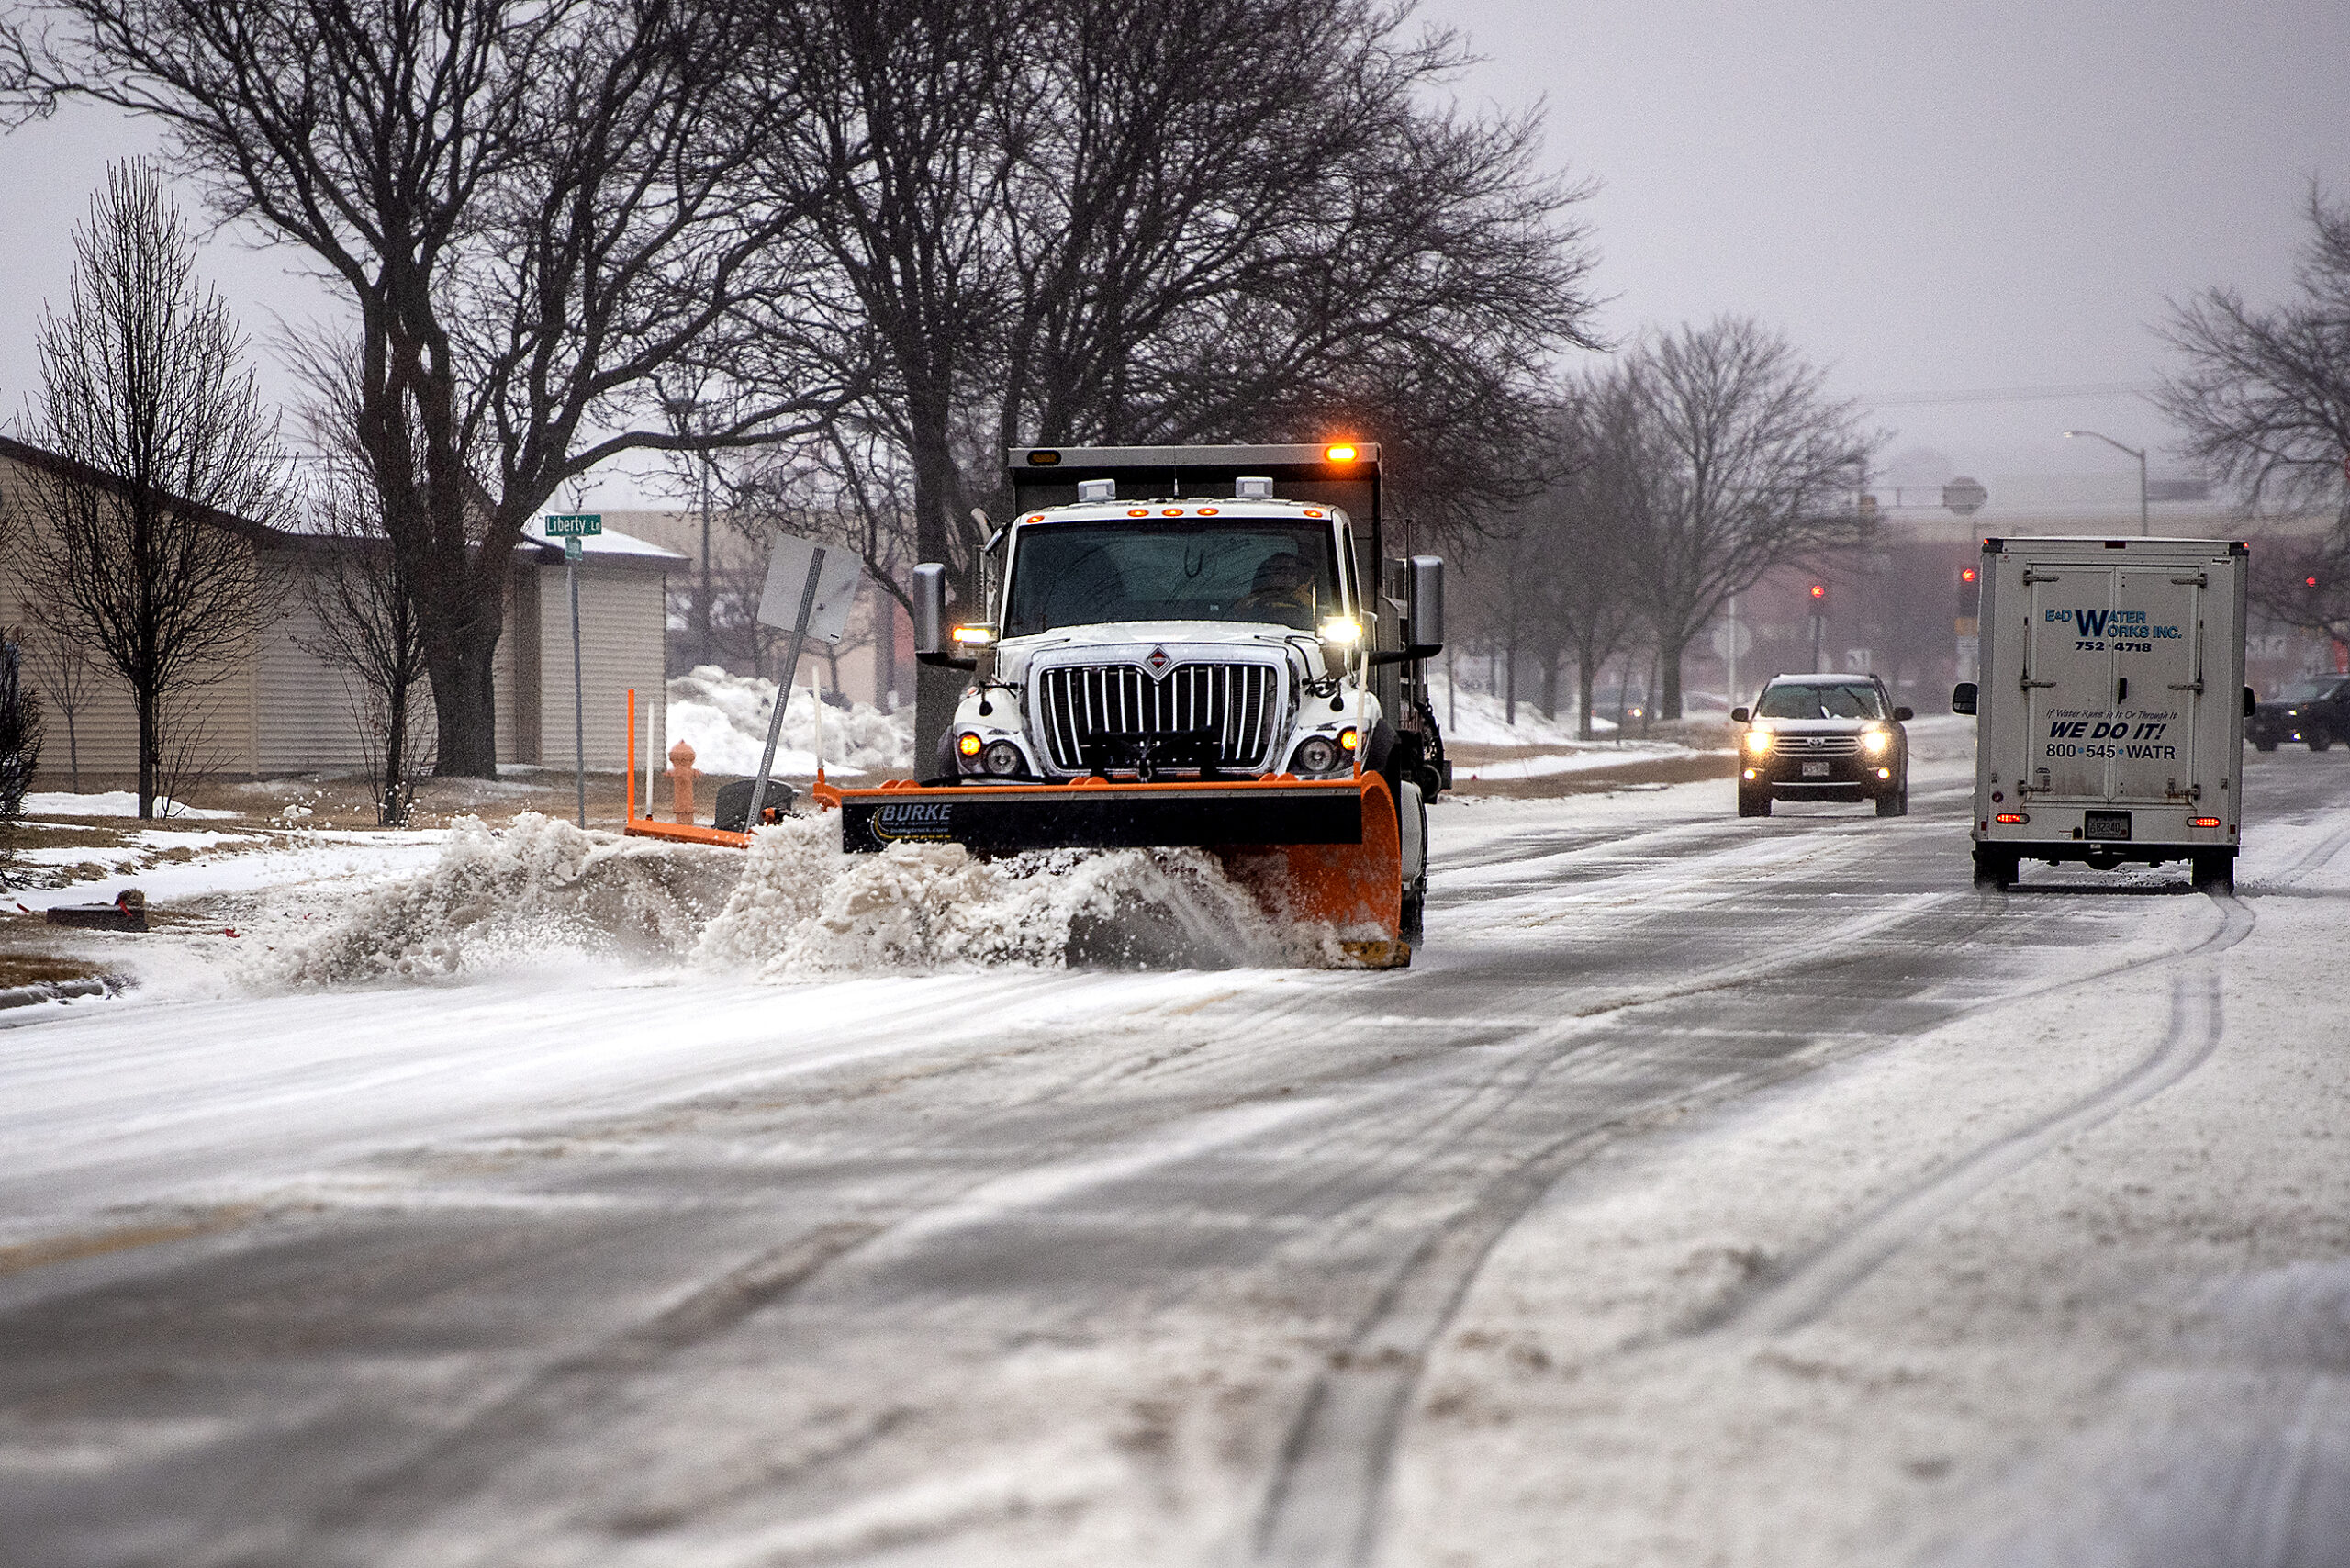 Snow sloshes as it is moved to the side of the street by a white truck with an orange plow.